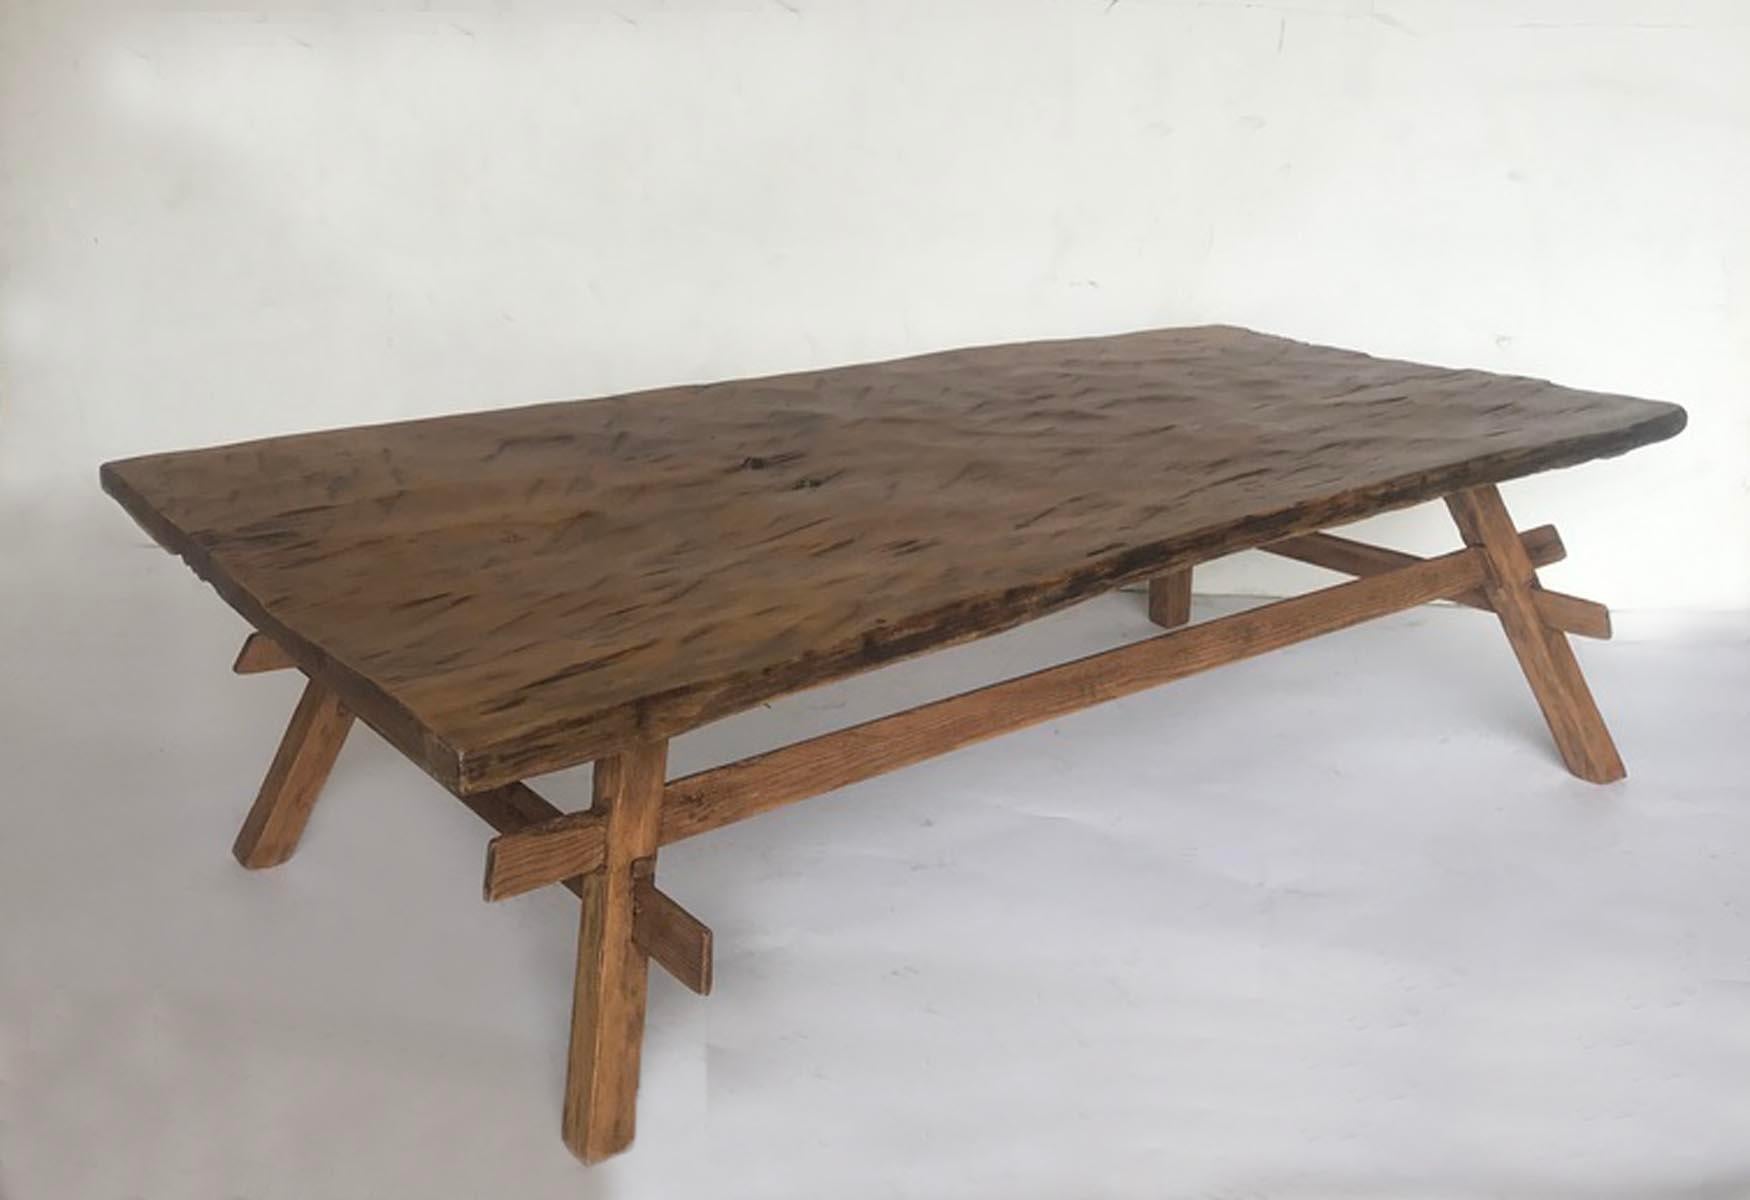 Rustic coffee table made from an antique, one wide board top and newer legs. Top is hand hewn. Table top is slightly warped but it does not take away from being a functional table.